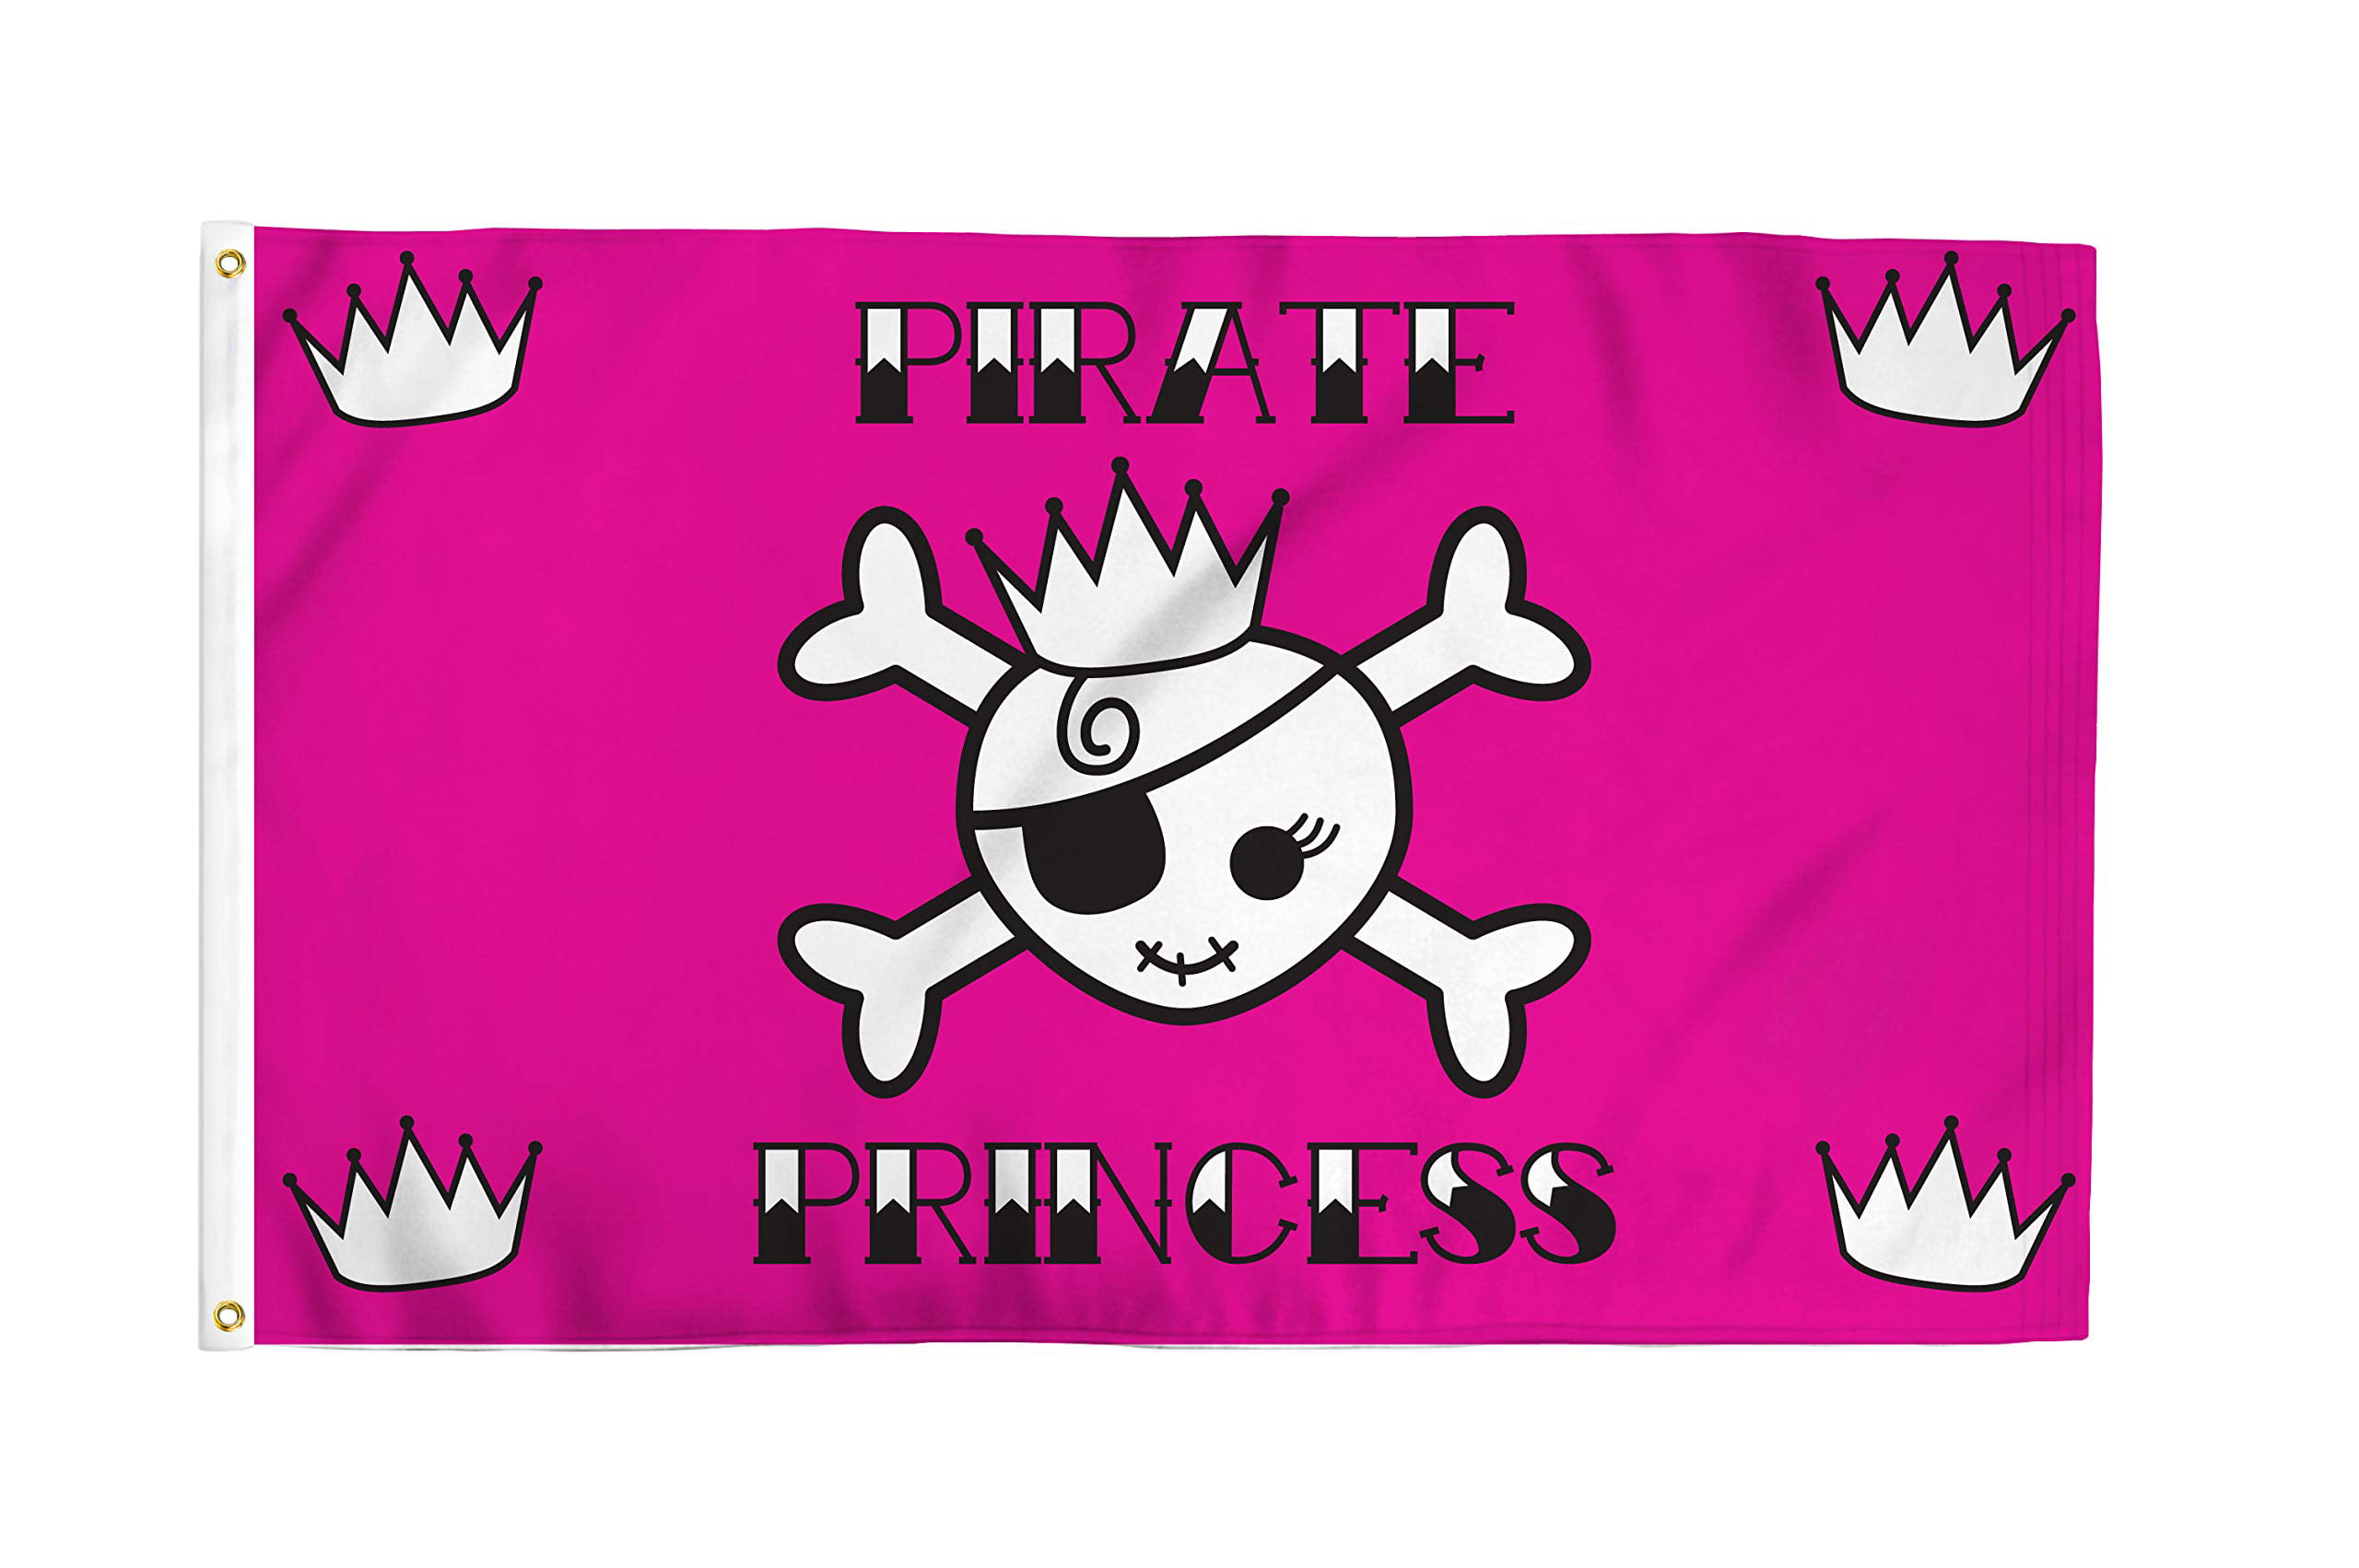 UV Resistant Mighty-Locked Stitching Pirate Princess 3x5 Ft Skull MC Biker Flag Golden Brass Grommets Perfect for Indoor or Outdoor Flying! Bold Vibrant Colors Durable 100 Denier Polyester 